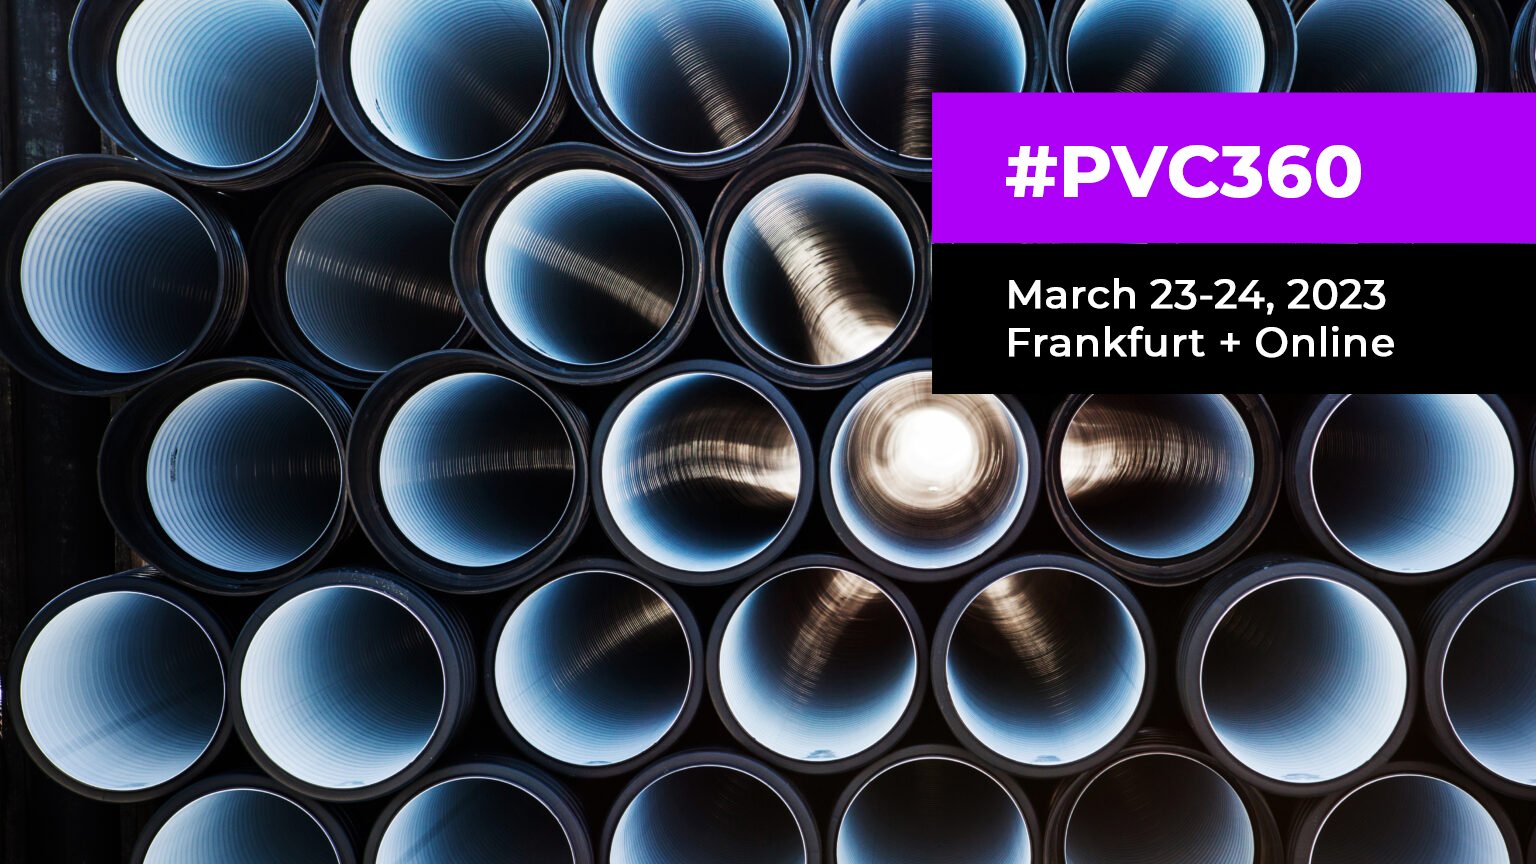 PVC 360 Event - Compounding, Processing and Recycling Summit